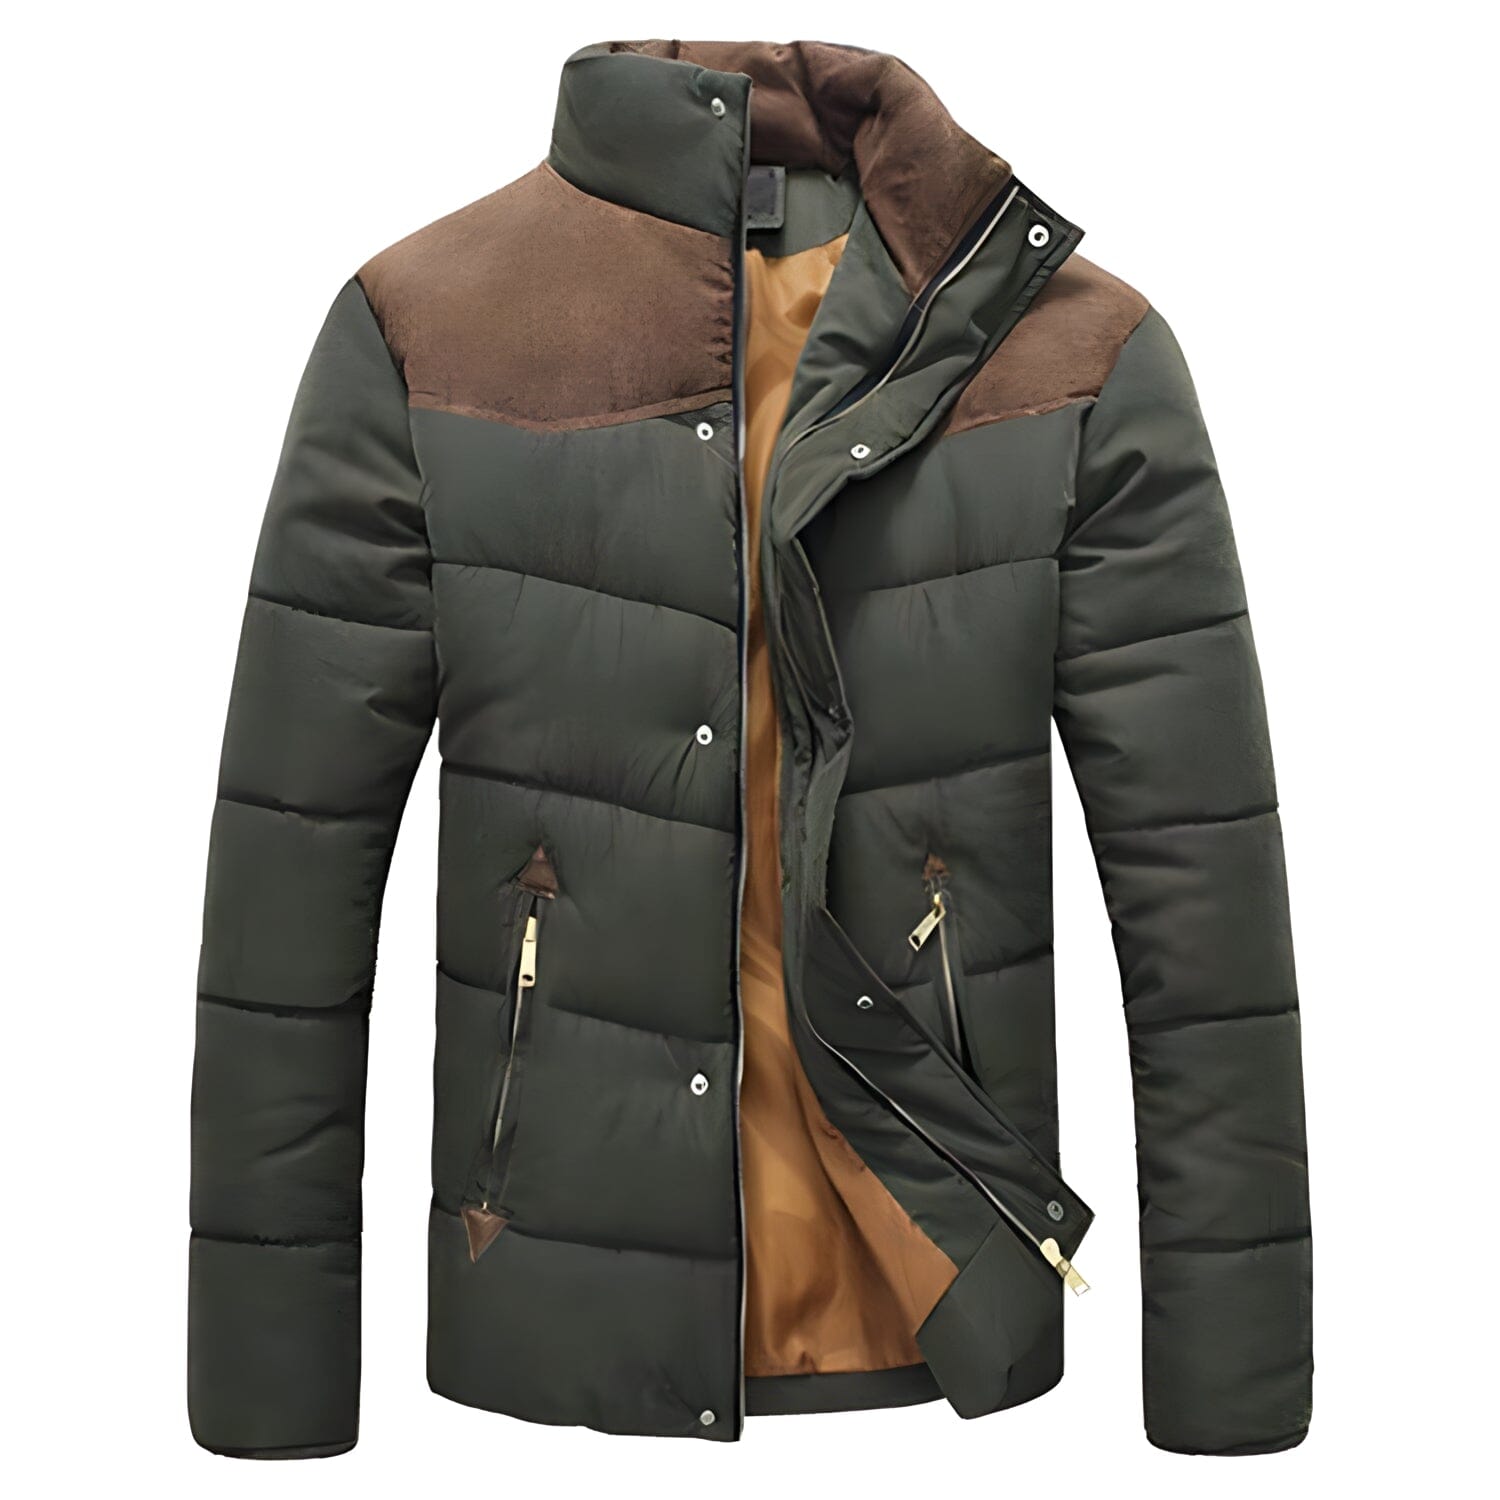 The Denver Winter Jacket - Multiple Colors Well Worn Green S 